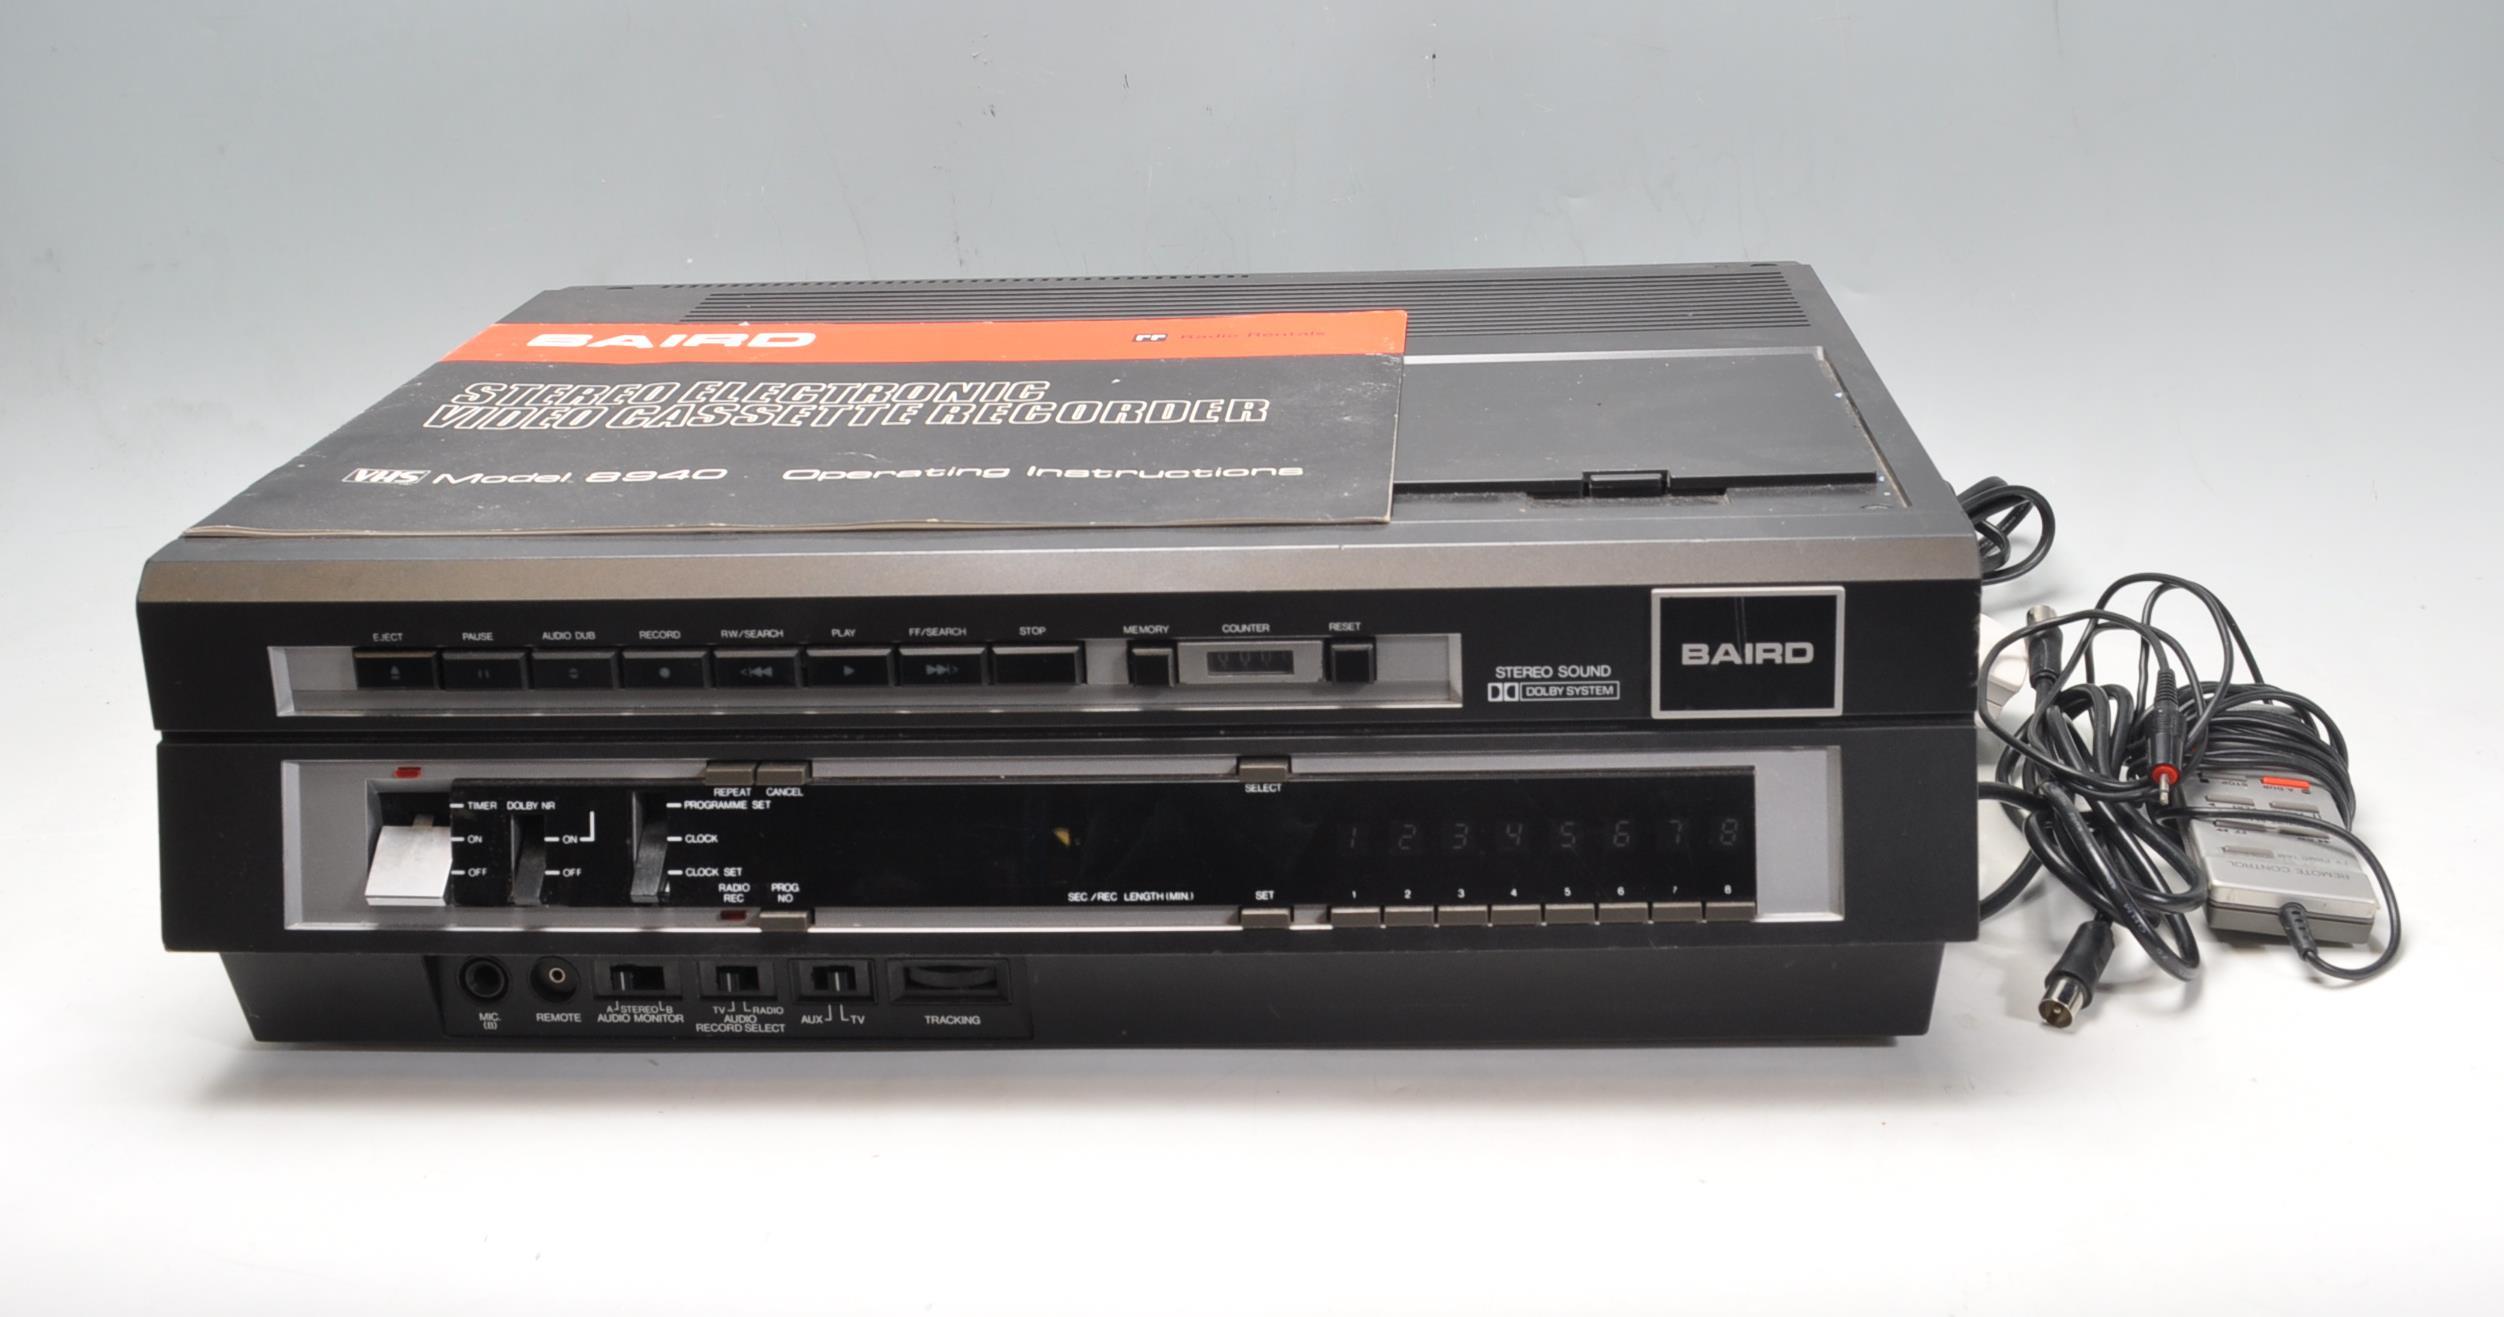 FIRST ONE OF THE SERIES BAIRD STEREO ELECTRONIC VIDEO CASSETTE RECORDER VHS